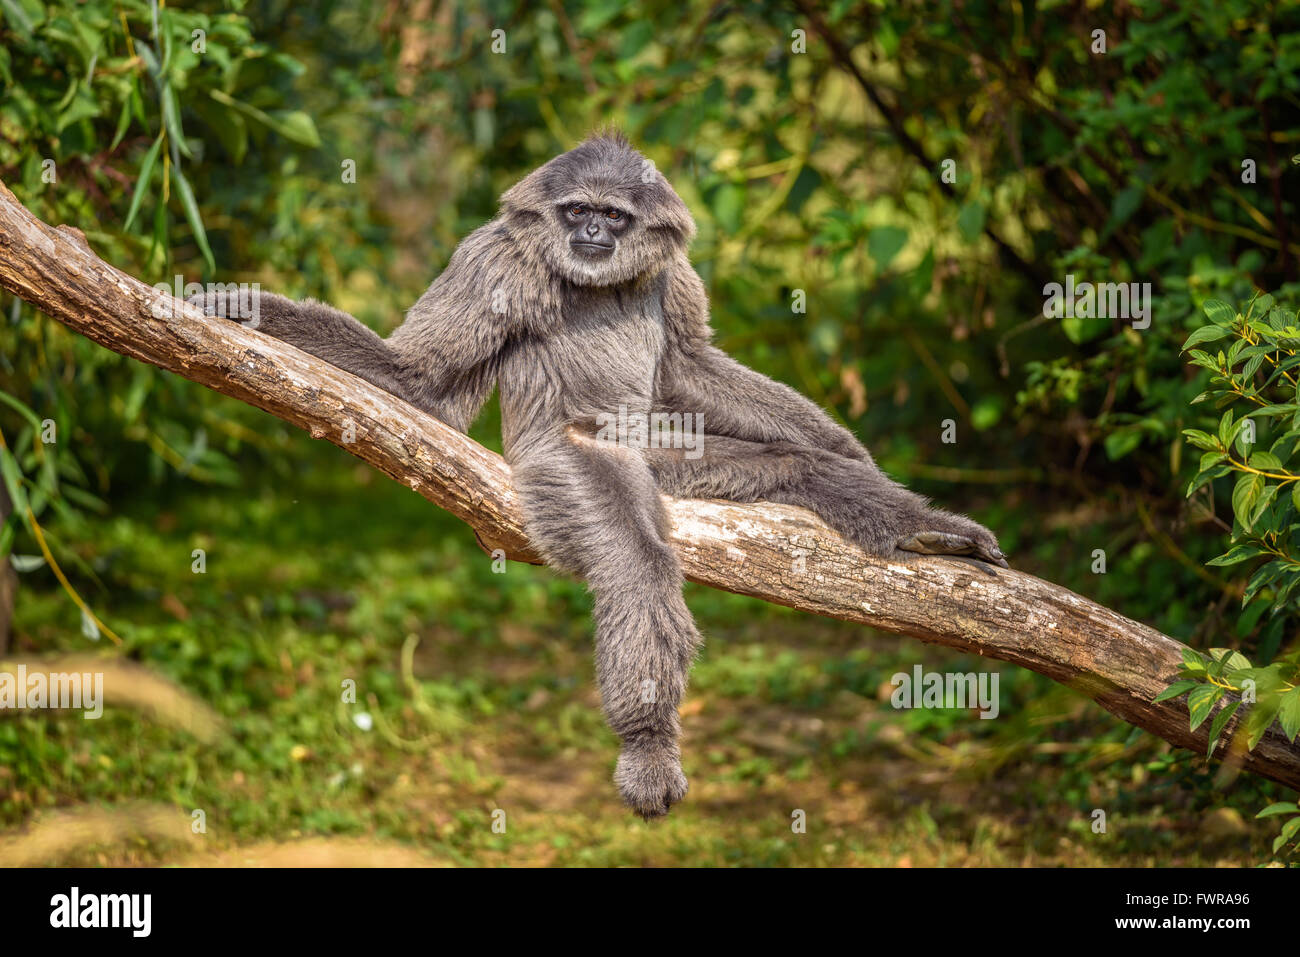 Silvery gibbon (Hylobates moloch) sitting on a branch. The silvery gibbon ranks among the most threatened species. Stock Photo